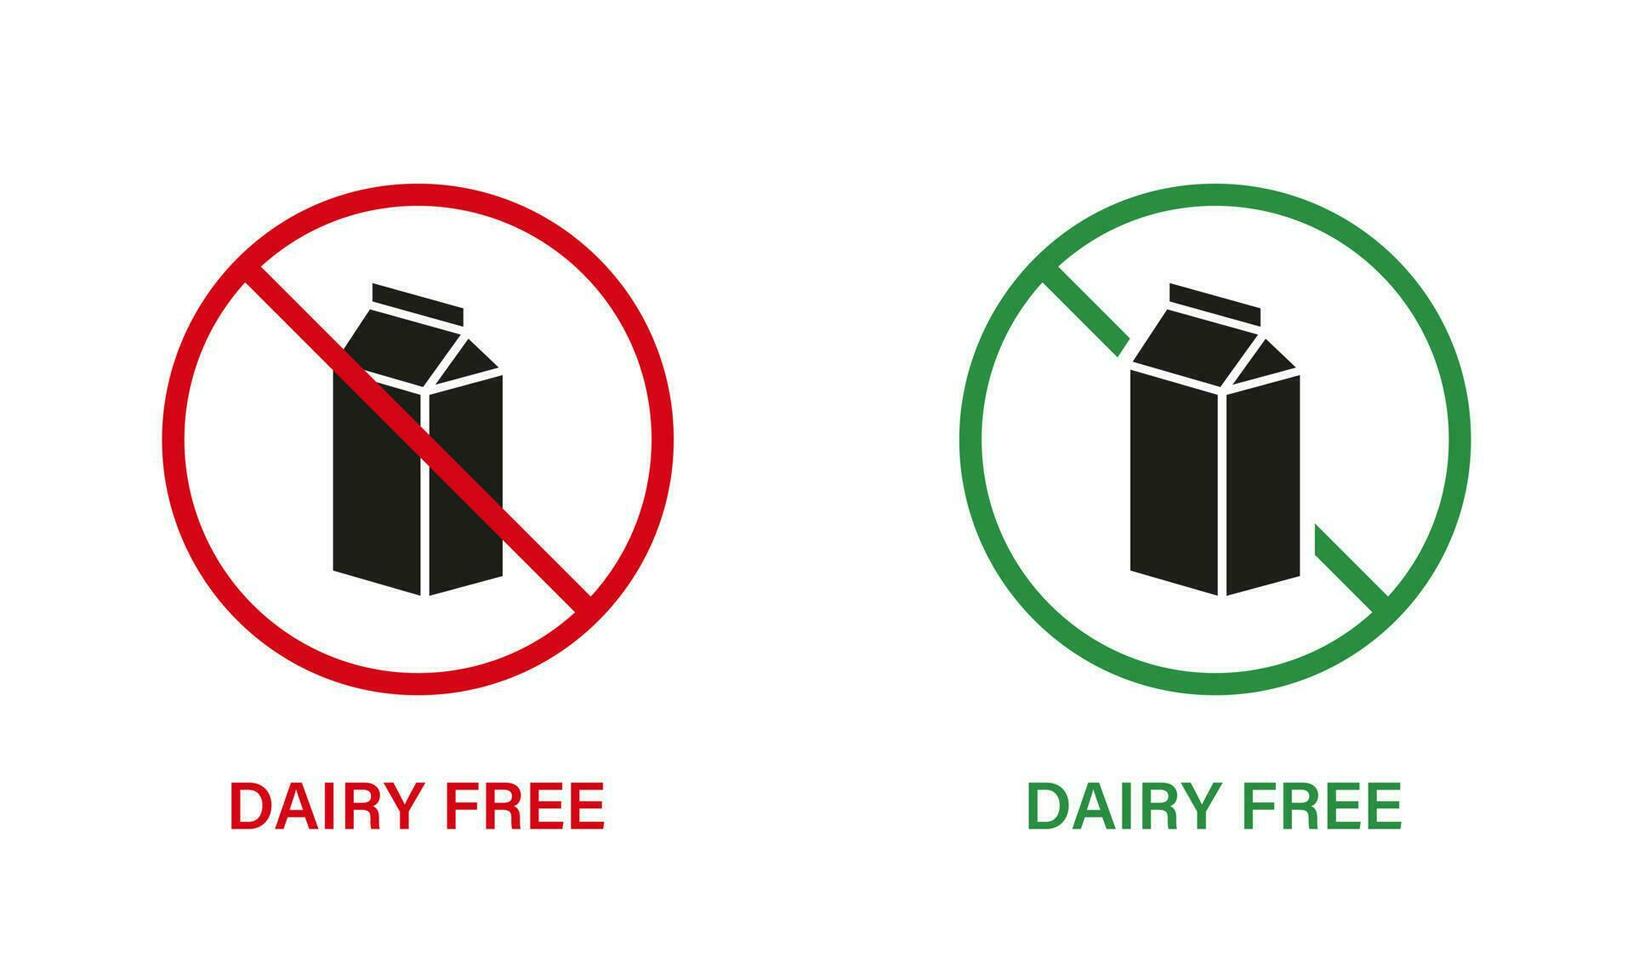 Dairy Free Silhouette Icon Set. Dairy Stop Sign, Only Healthy Food. Cow Milk Lactose Forbidden Symbol. Free Dairy Diet Logo. No Lactose, Allergy Ingredient. Isolated Vector Illustration.